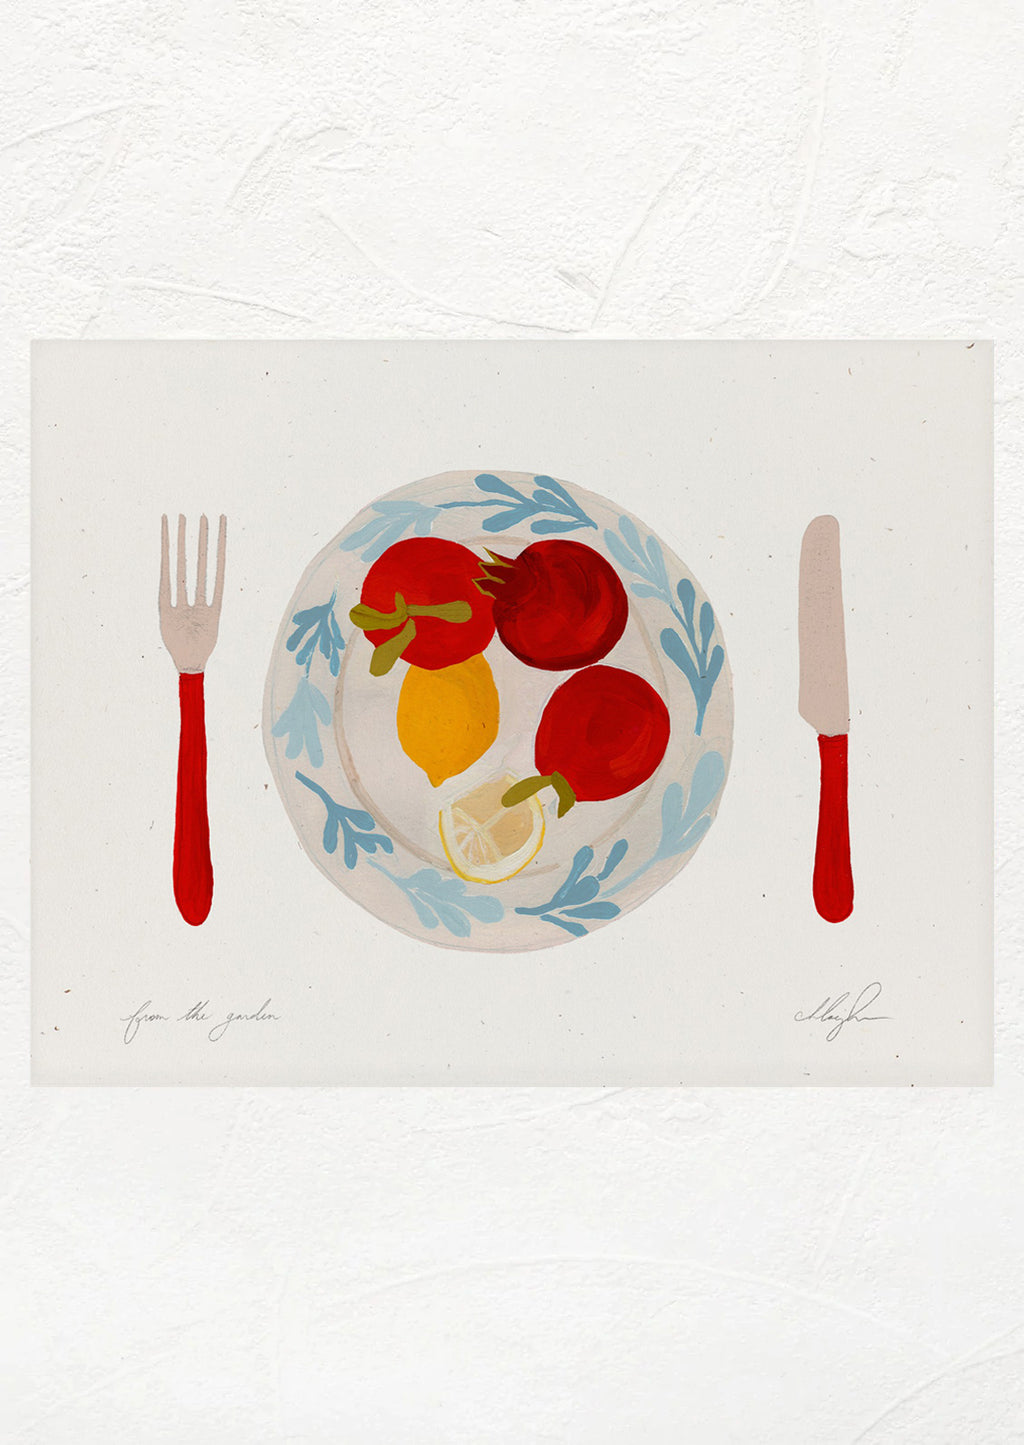 1: An art print of tomatoes and lemons on a plate with red knife and fork.